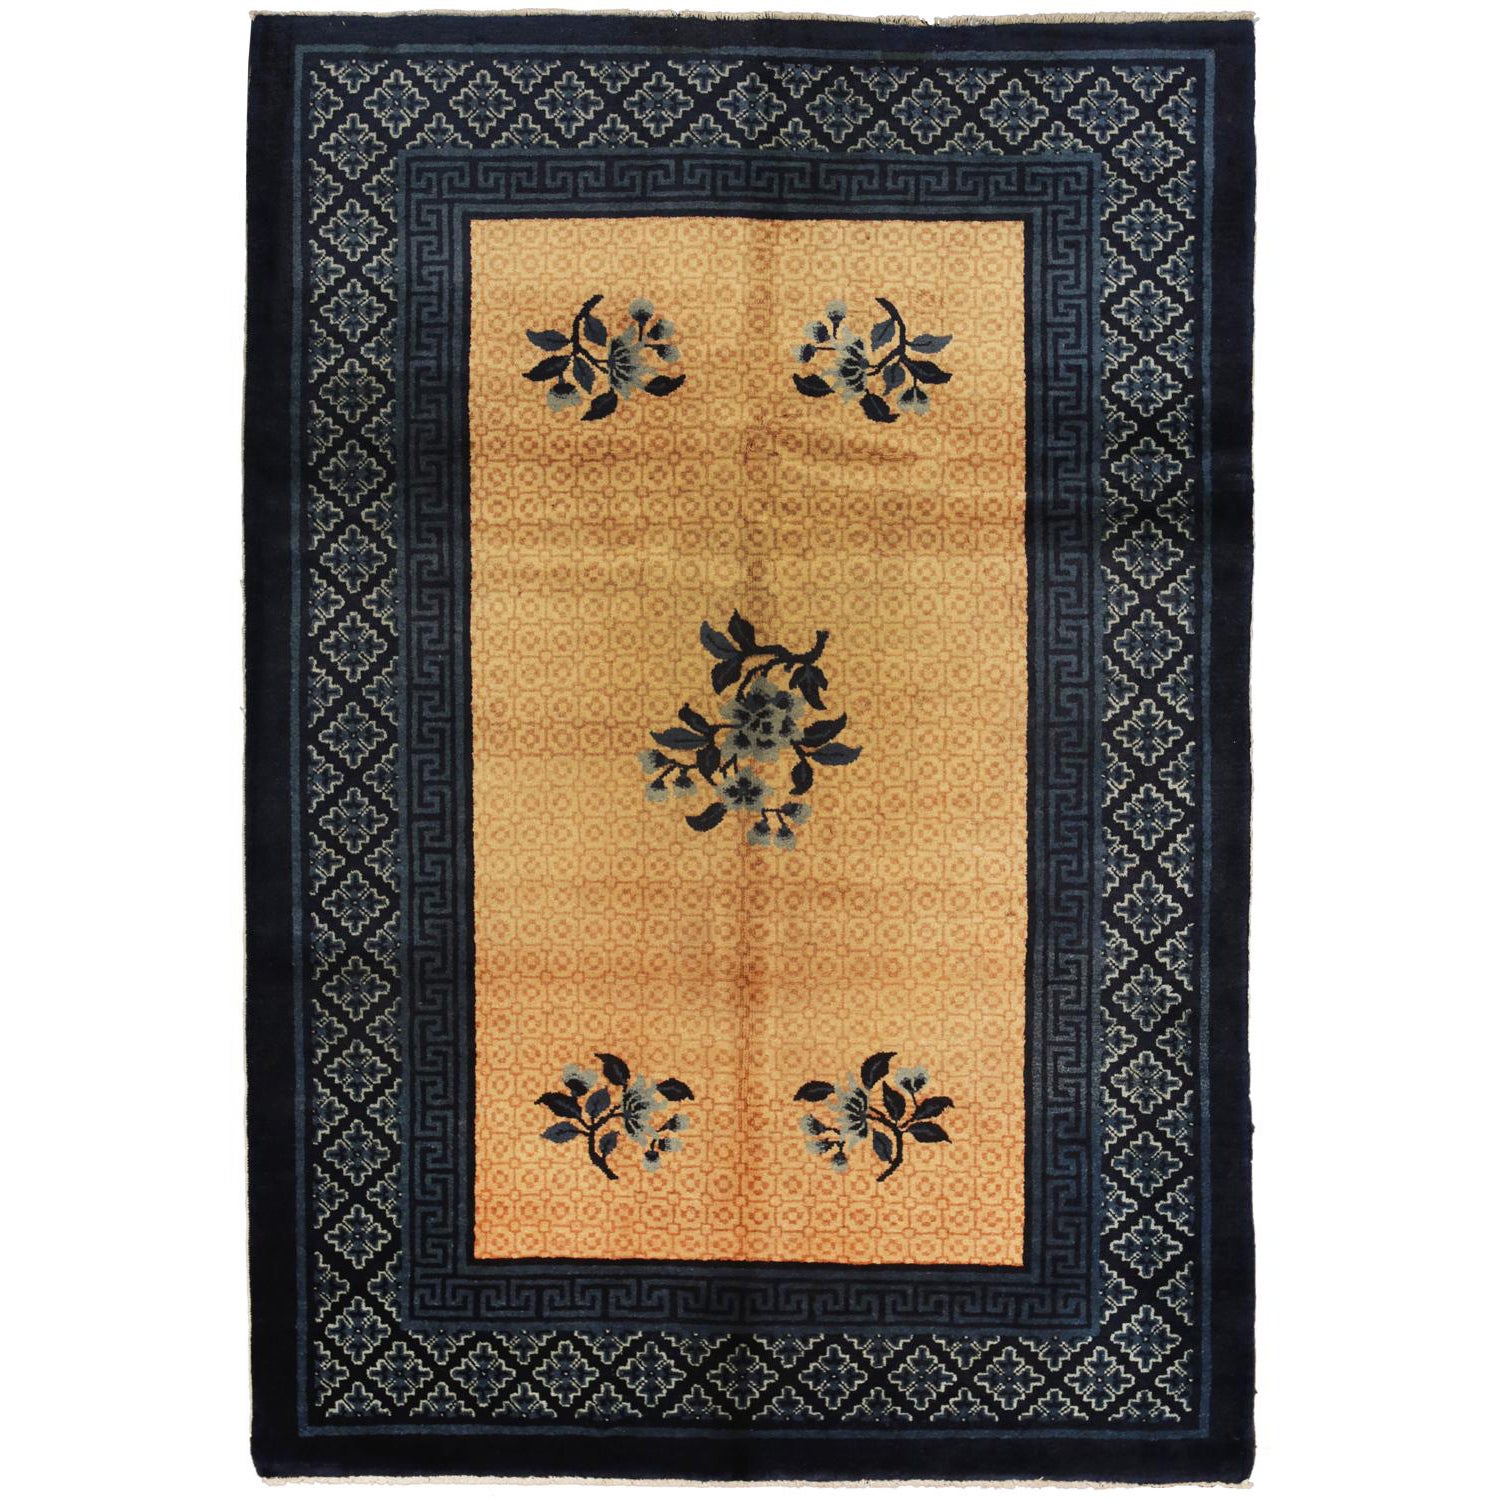 Antique Peking Chinese Ivory Field Wool Rug, 1900-1920 For Sale